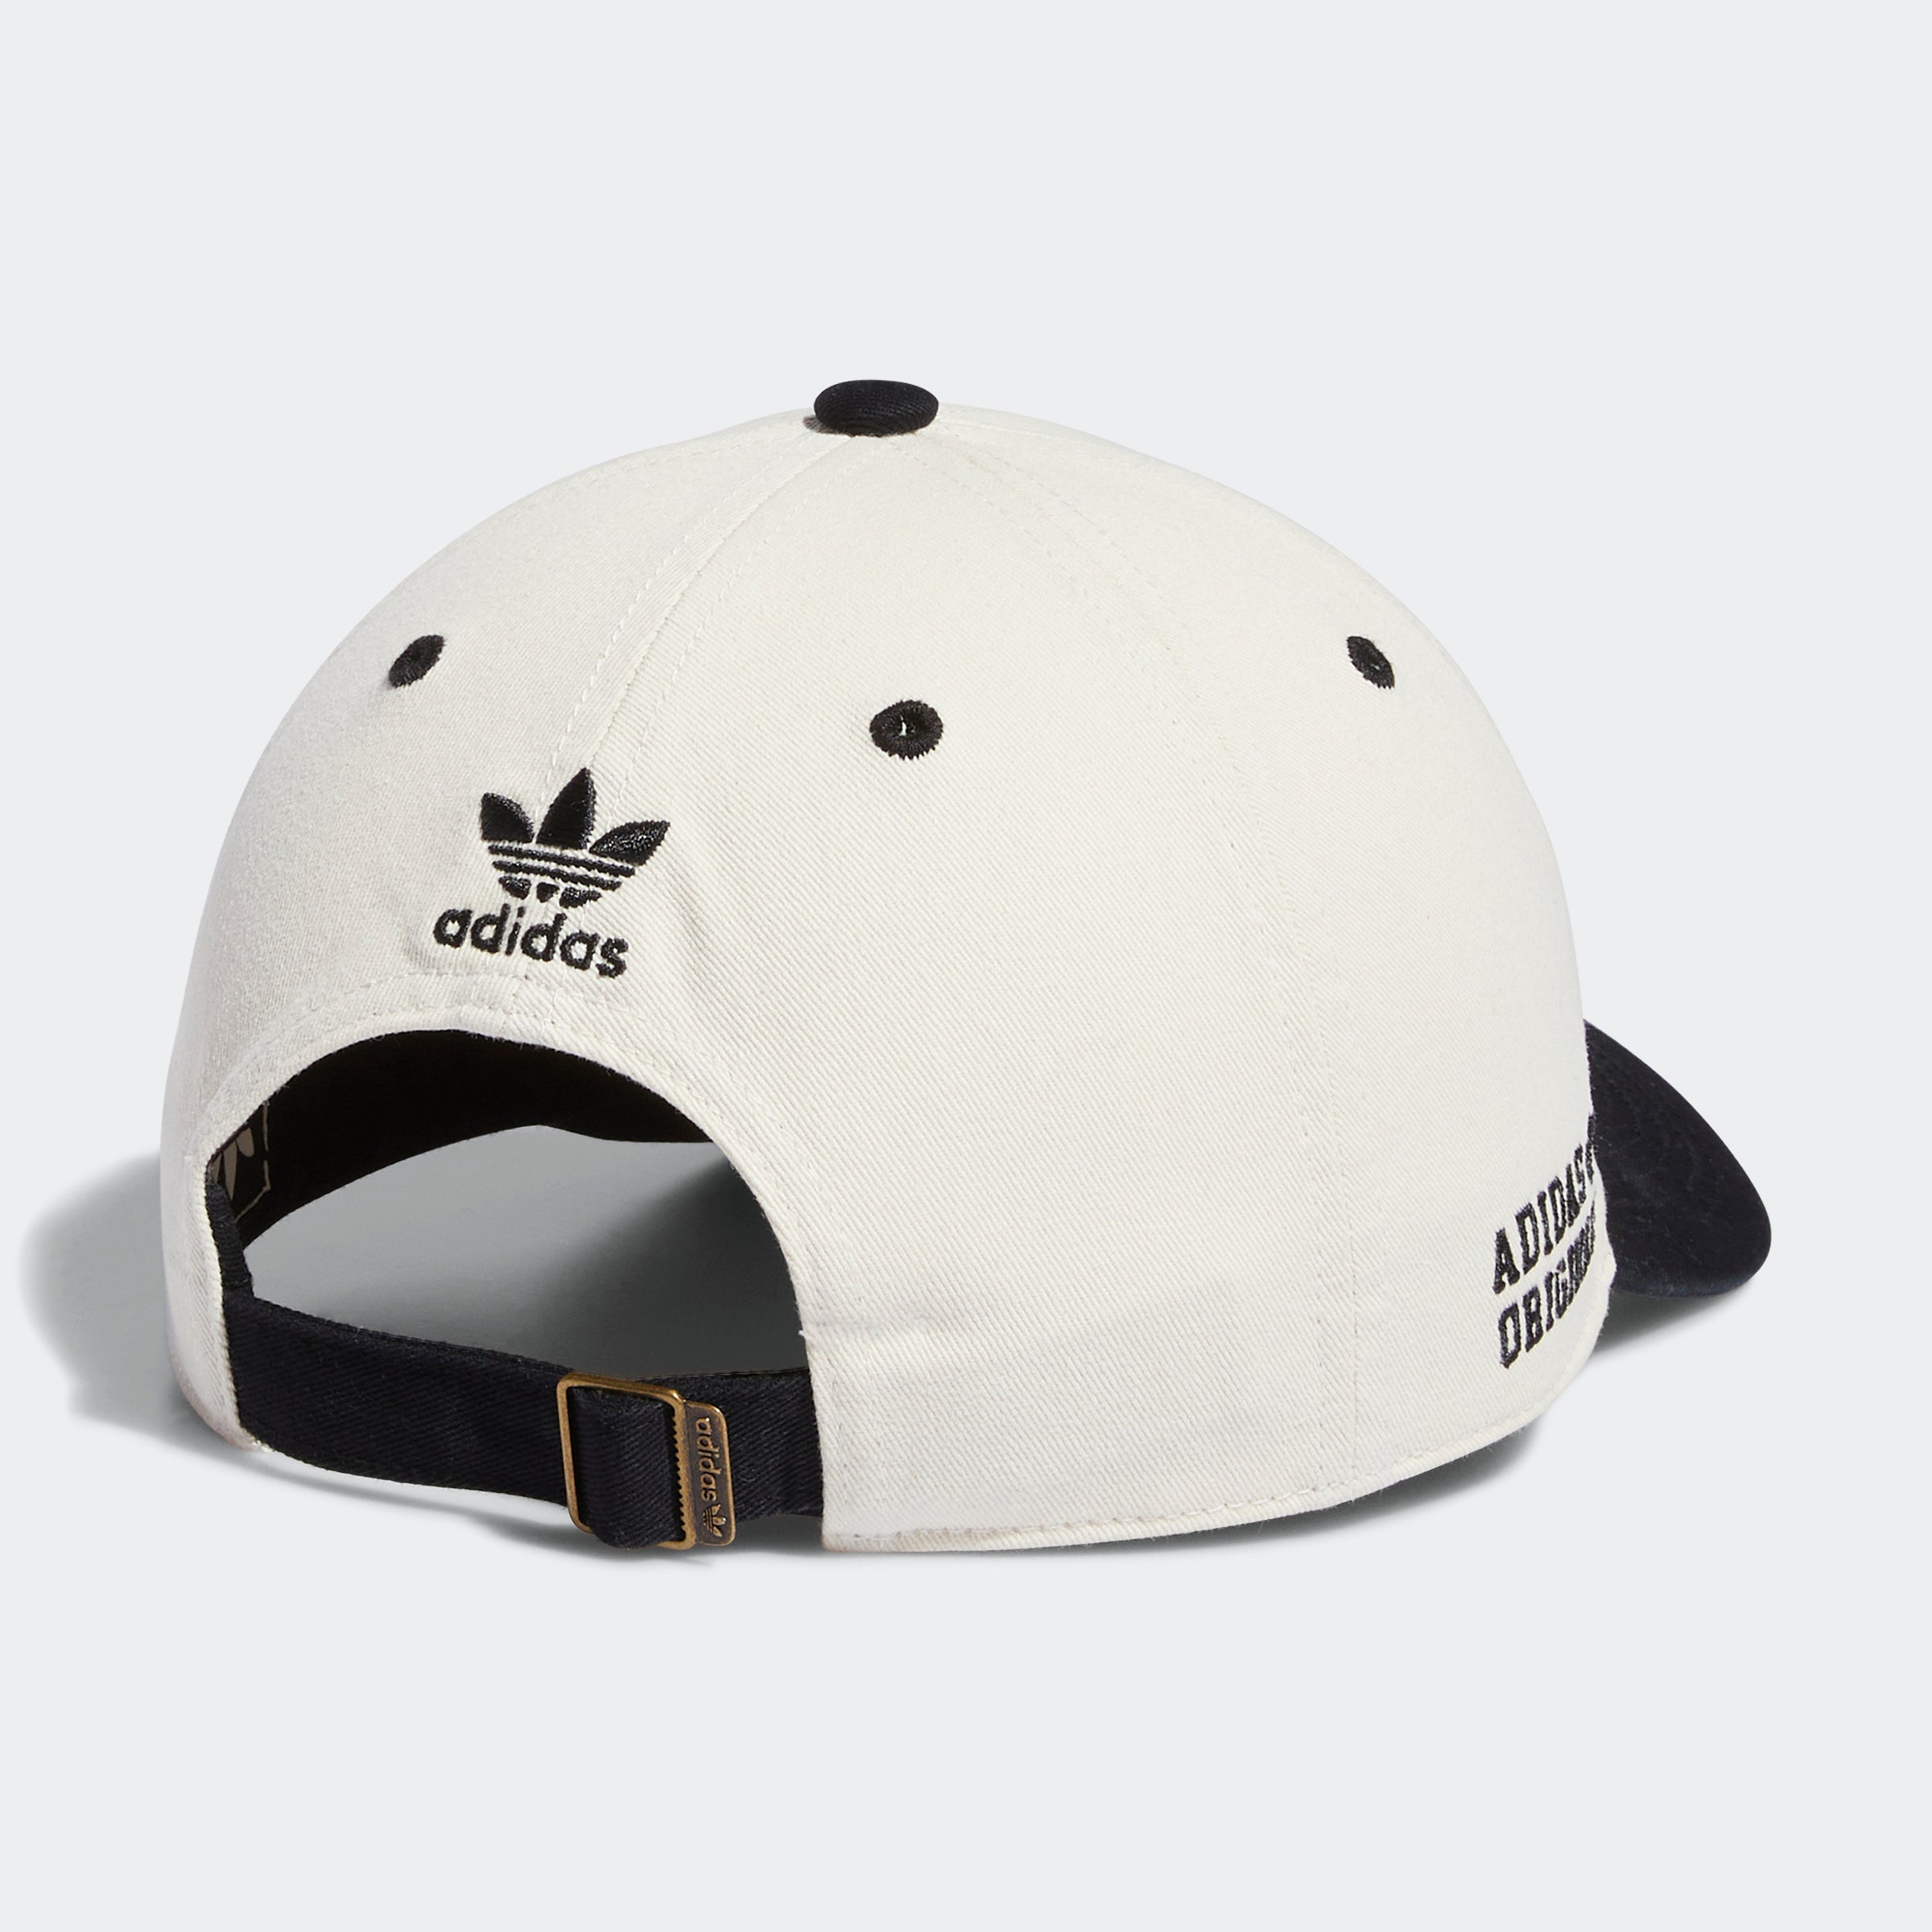 adidas Relaxed Hat Sports Wonder New | Prep Chicago GB4284 City White